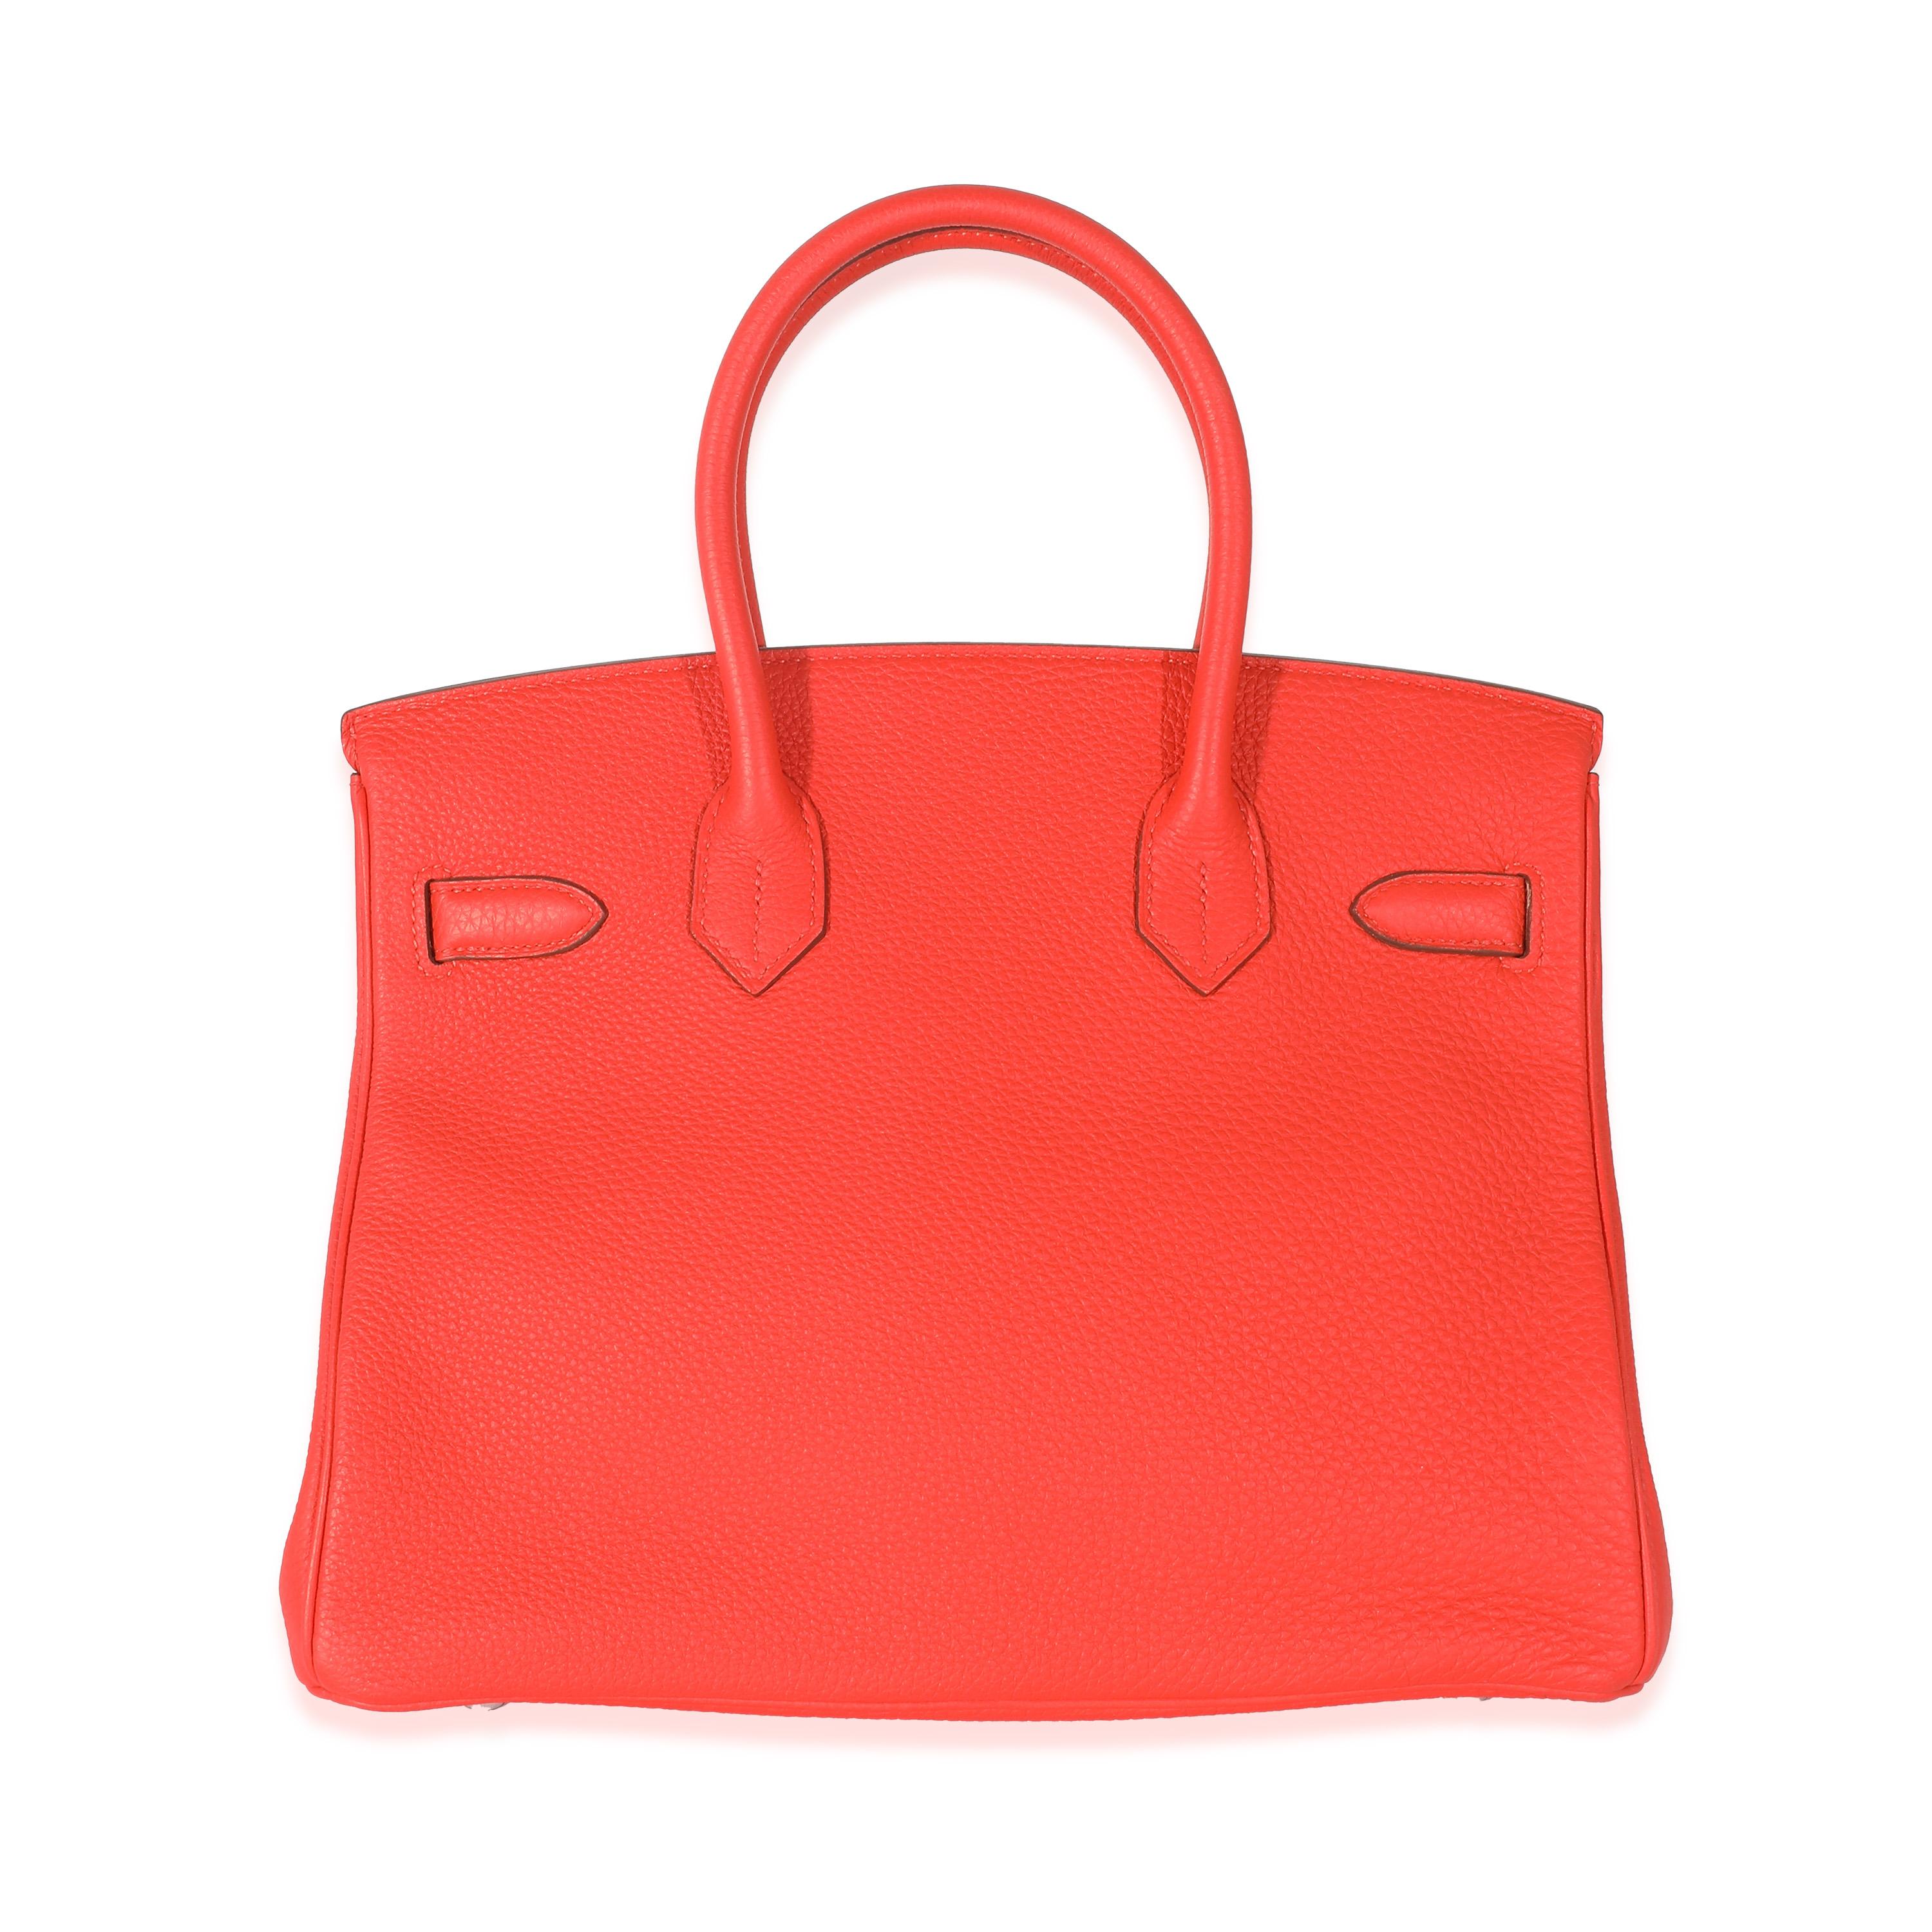 Listing Title: Hermès Capucine Togo Birkin 30 PHW
SKU: 133337
Condition: Pre-owned 
Handbag Condition: Very Good
Condition Comments: Item is in very good condition with minor signs of wear. Light discoloration along exterior leather and corners.